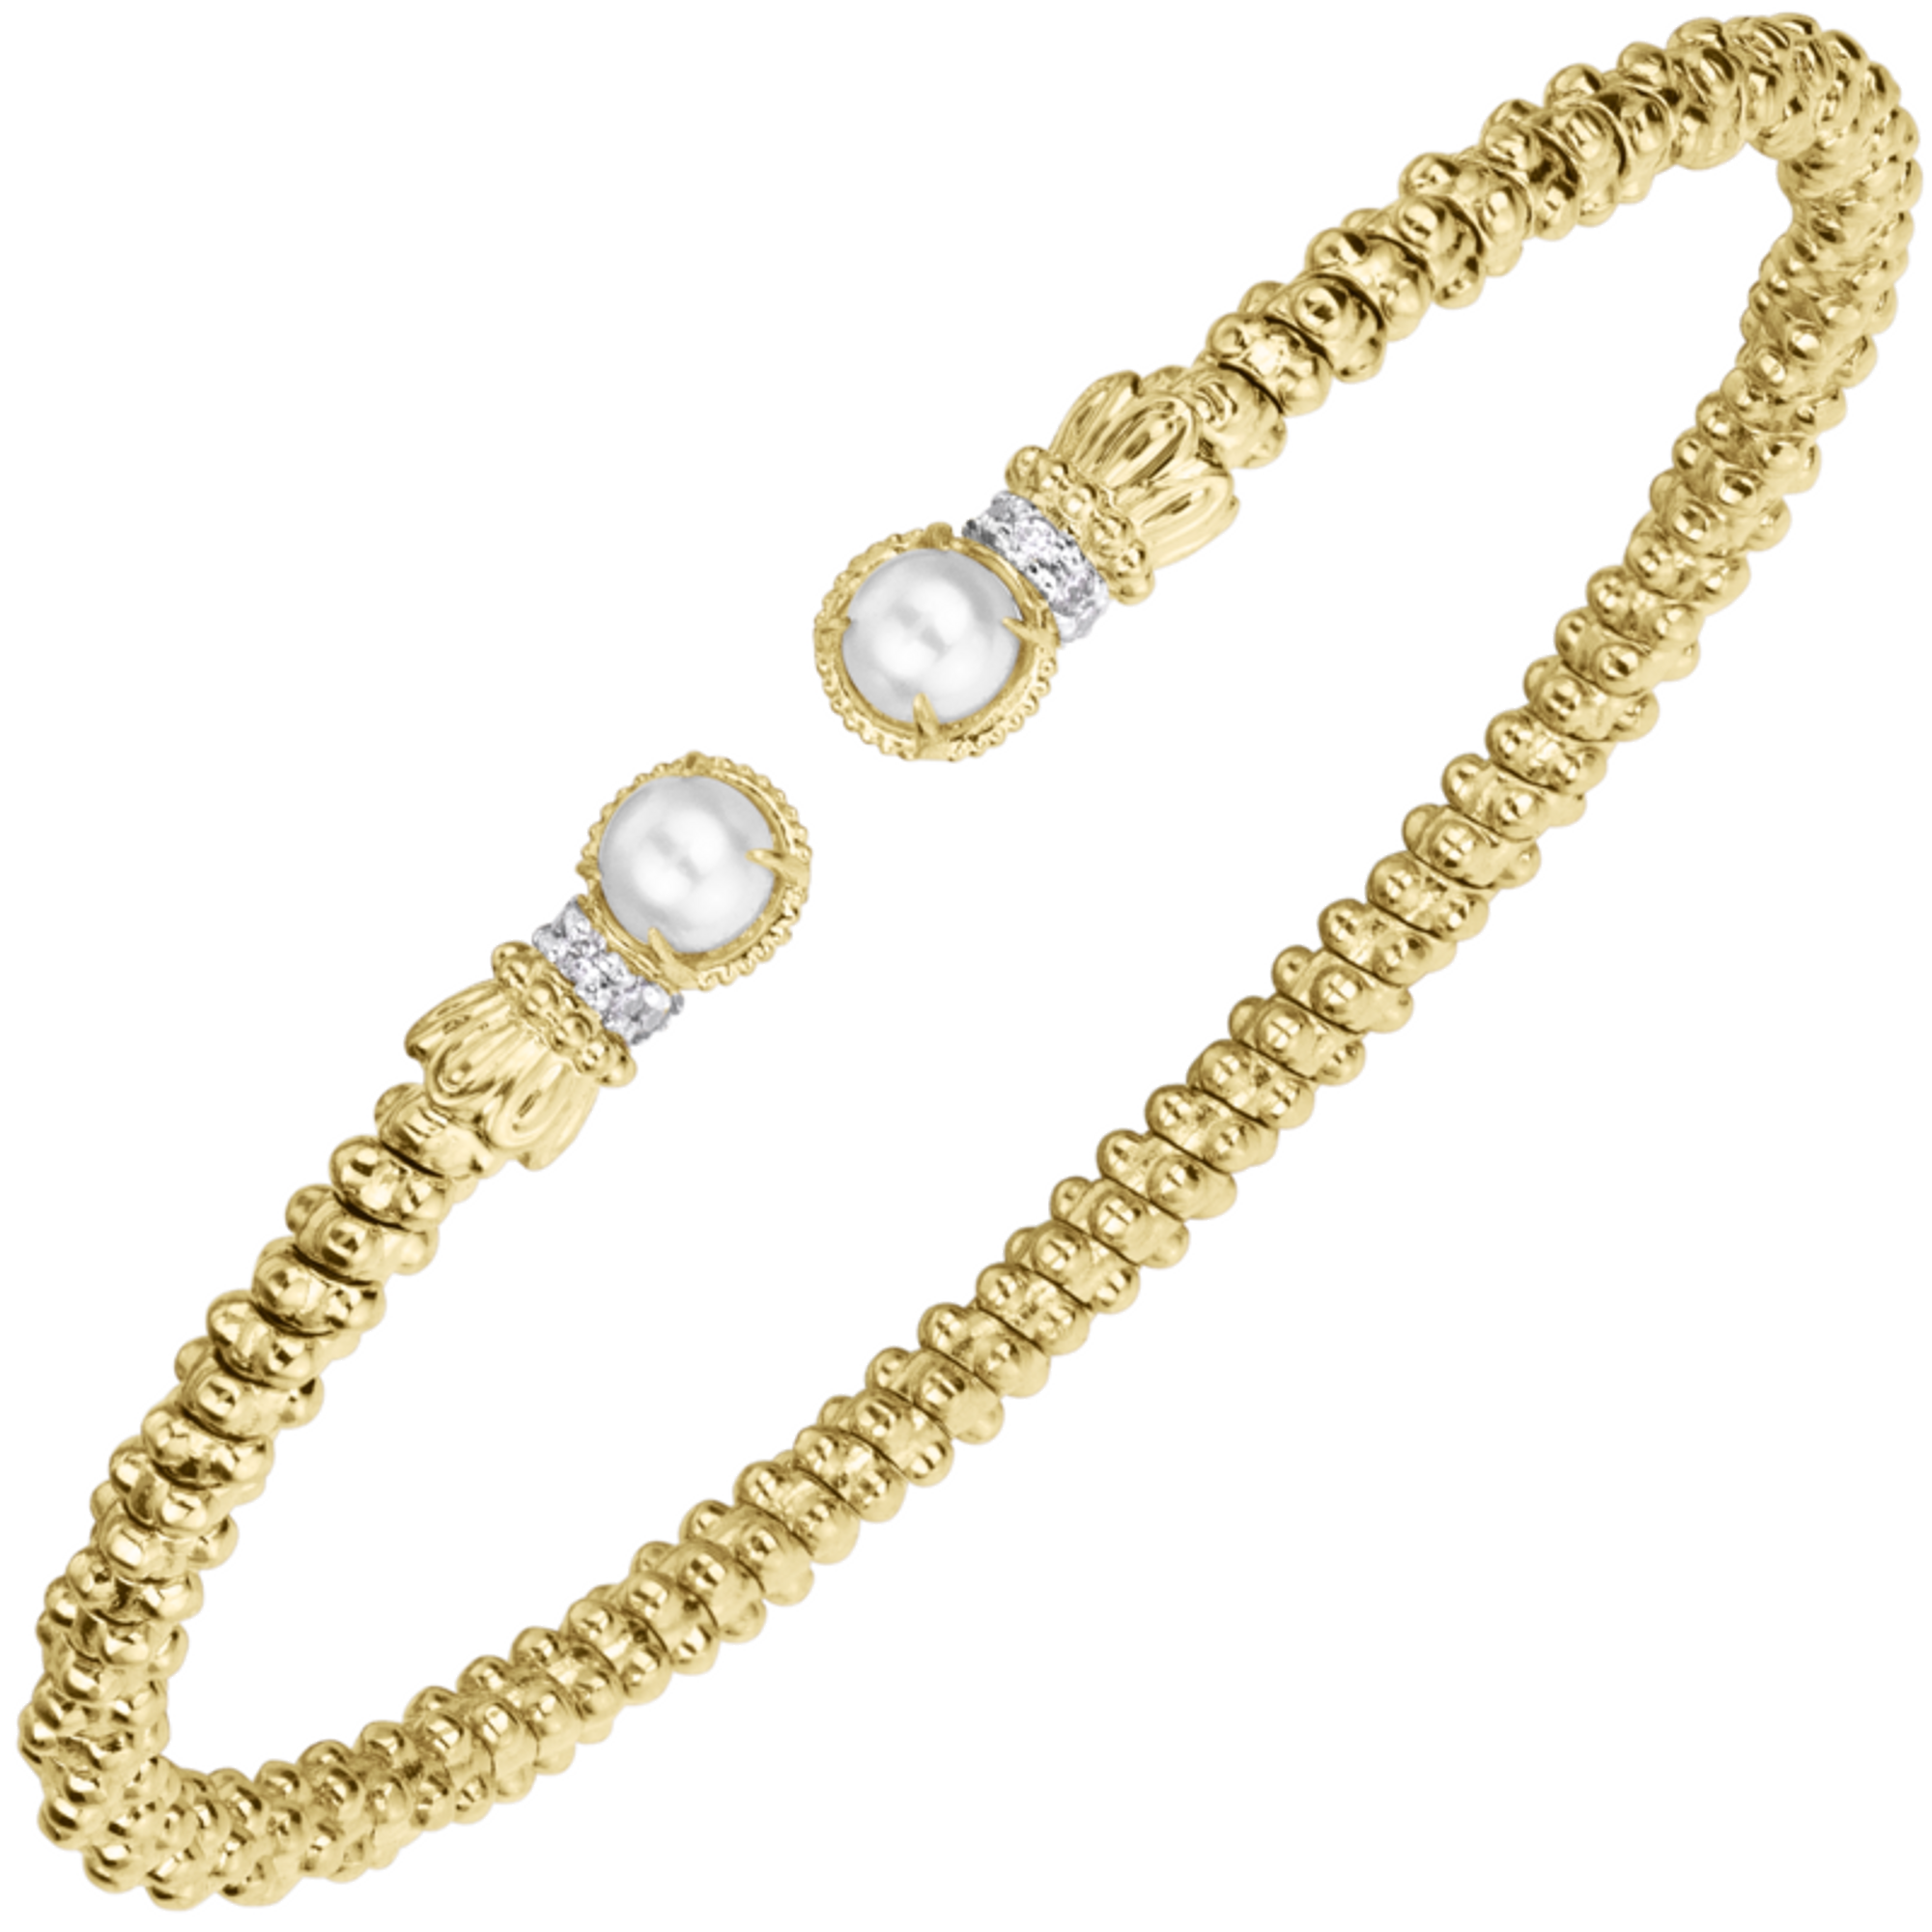 Gold Pearl Ends Bracelet by Alwand Vahan